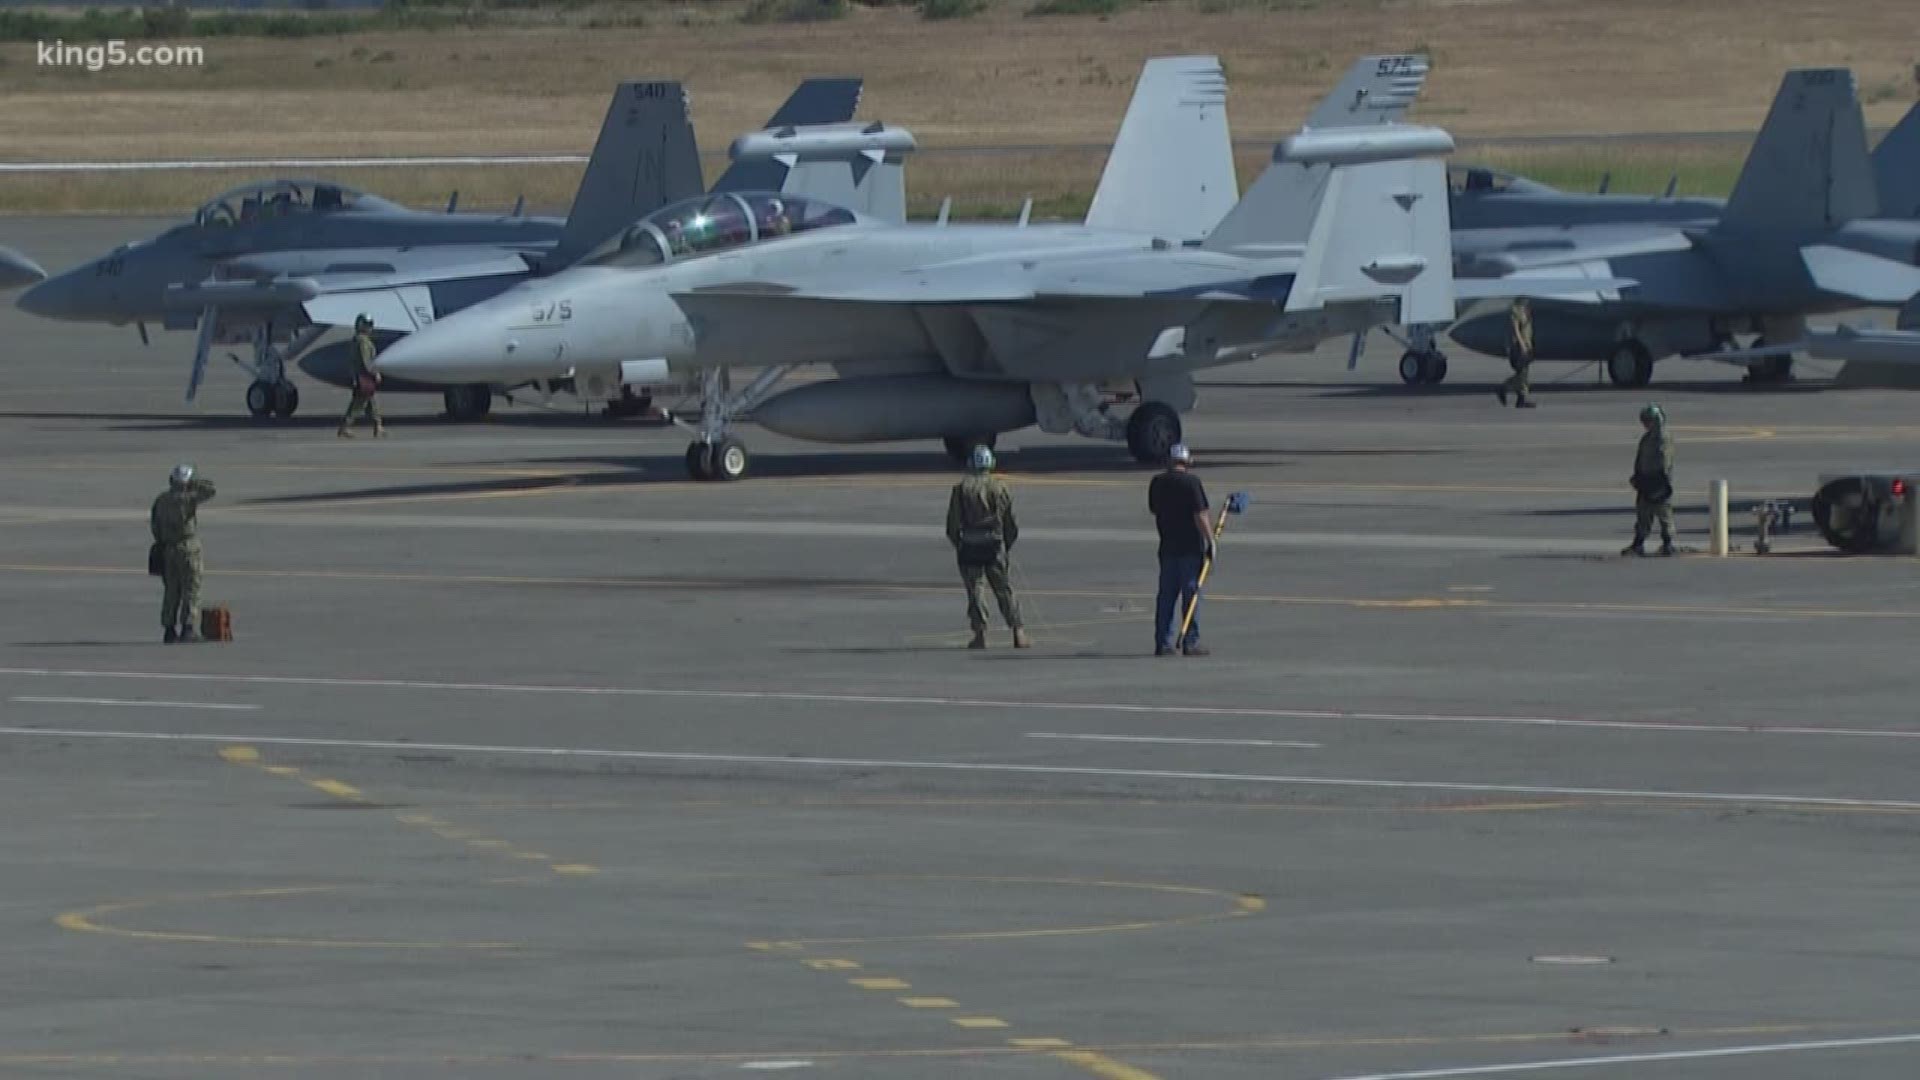 Navy Secretary Richard Spencer met with community leaders from across Whidbey Island to discuss noise issues surrounding Growler jets stationed in Oak Harbor.